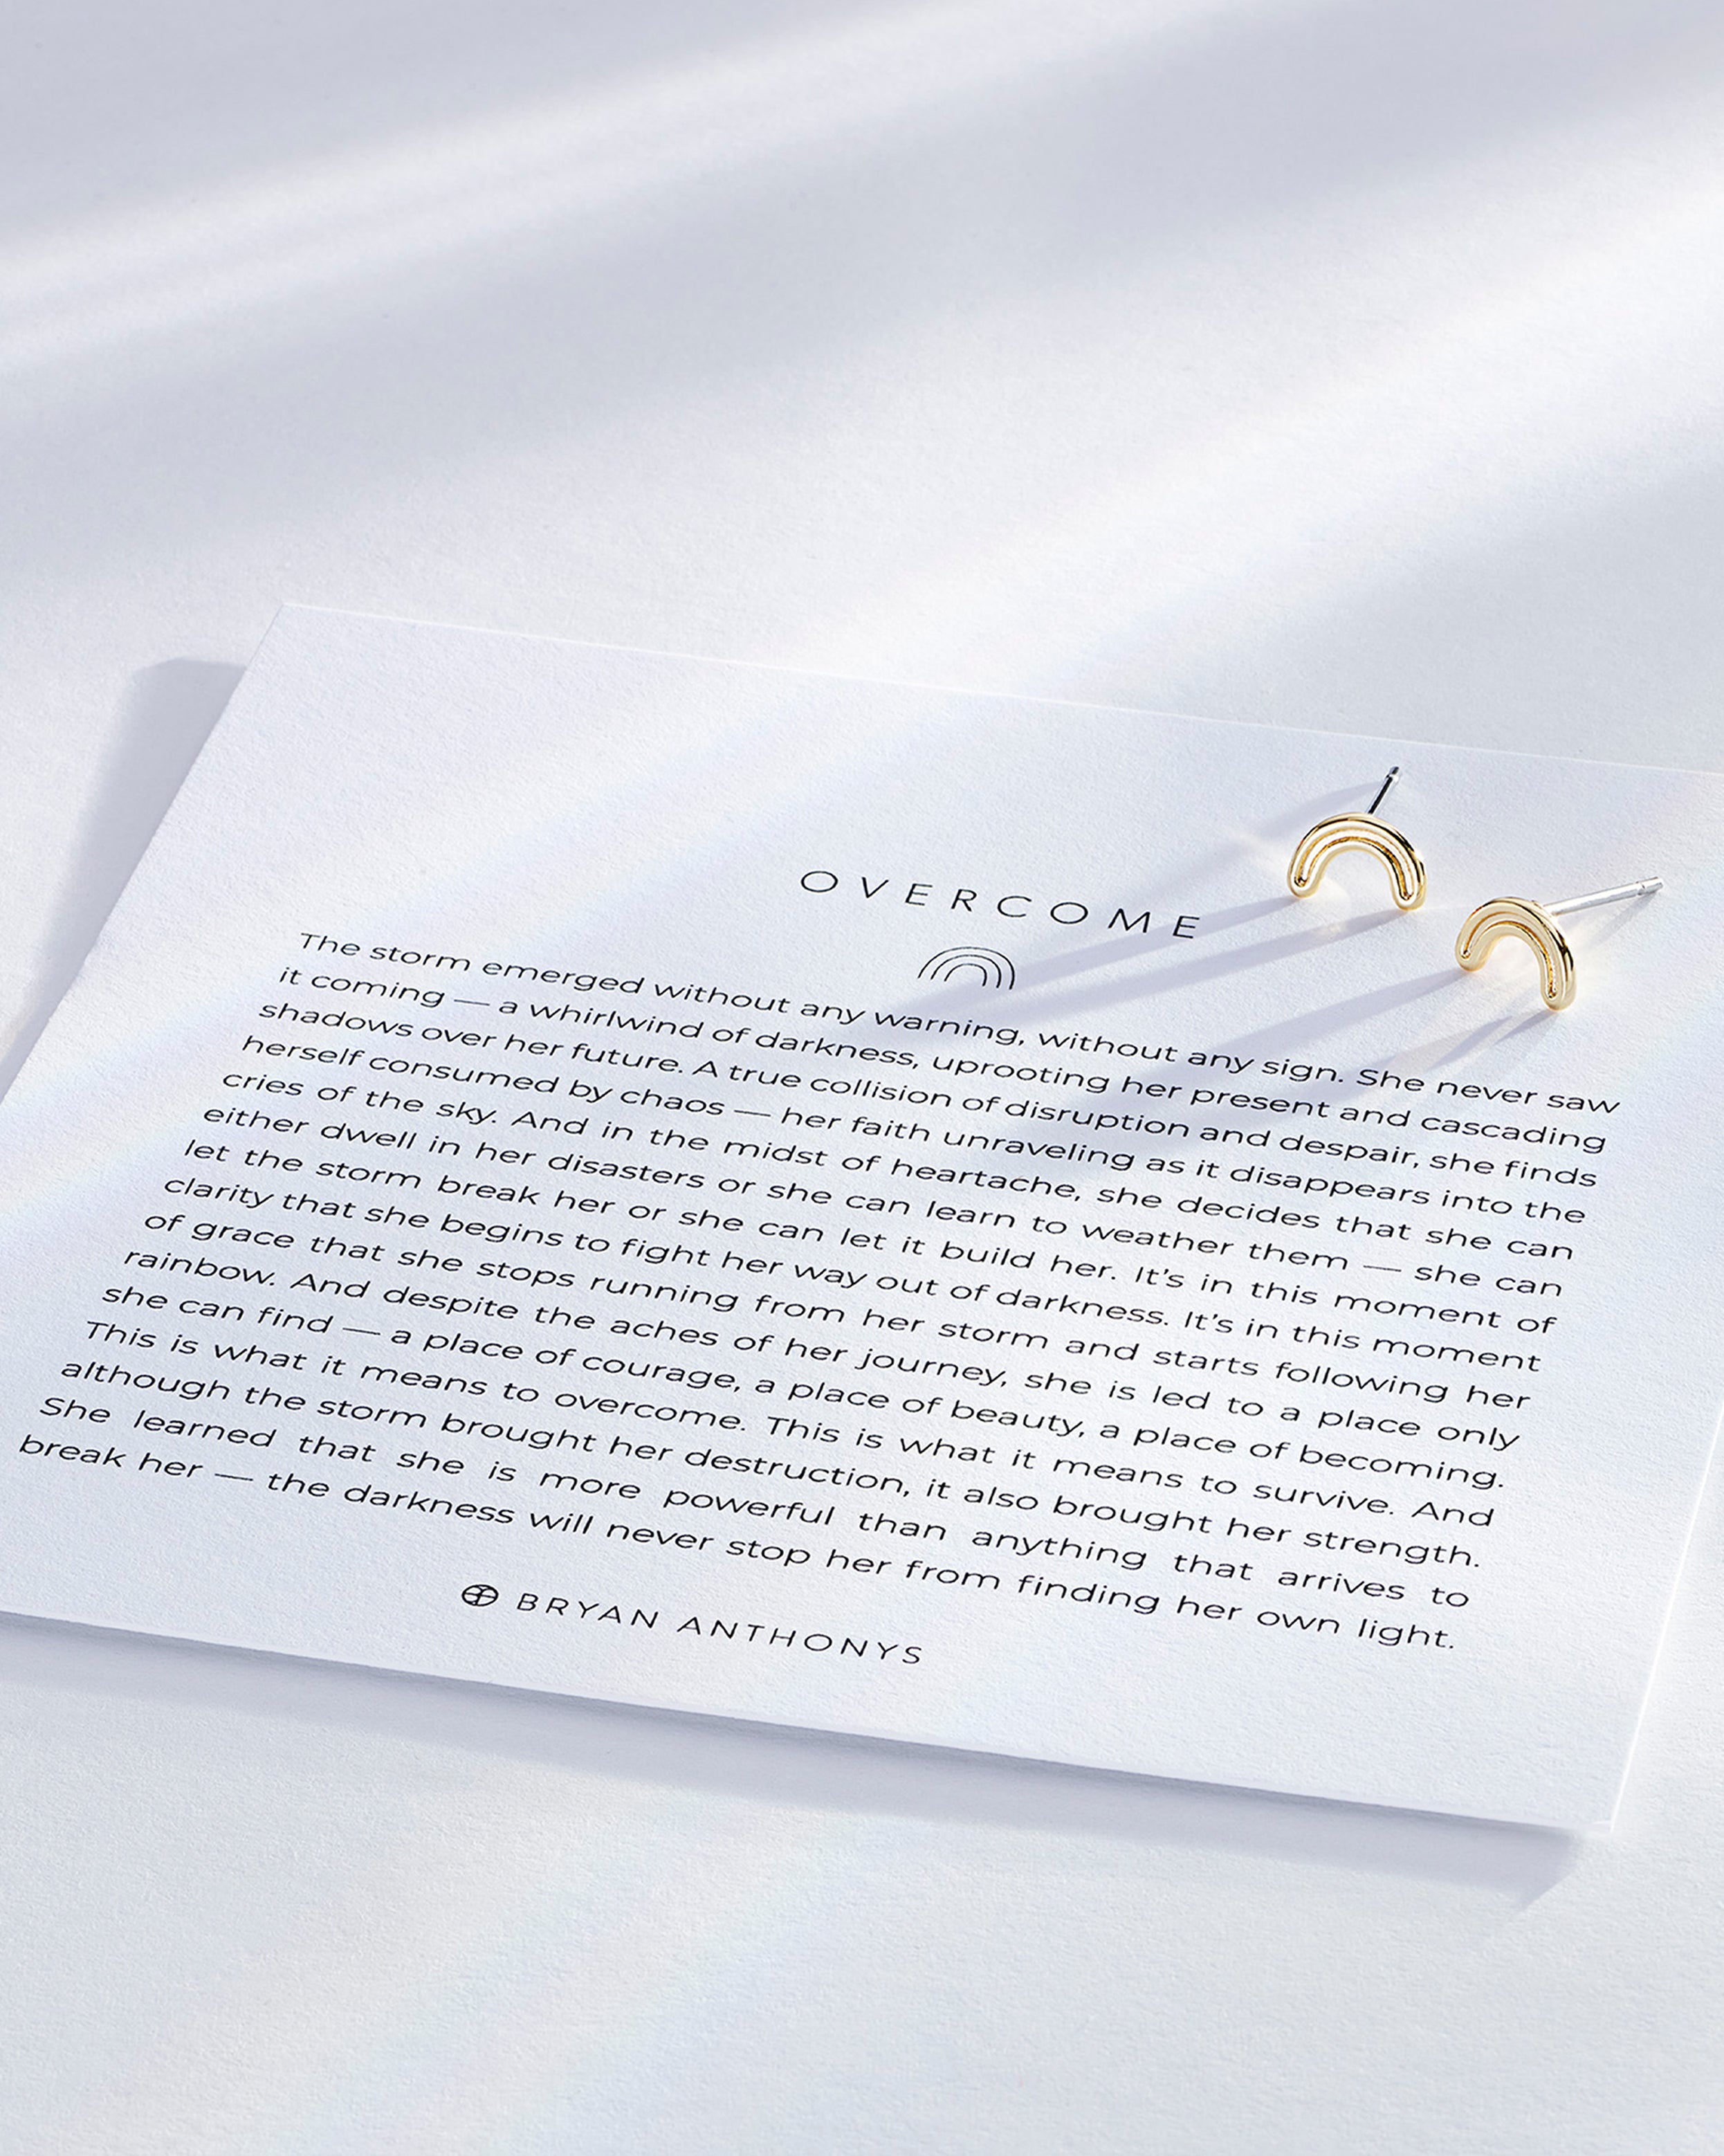 Overcome Earrings on card in 14k gold finish